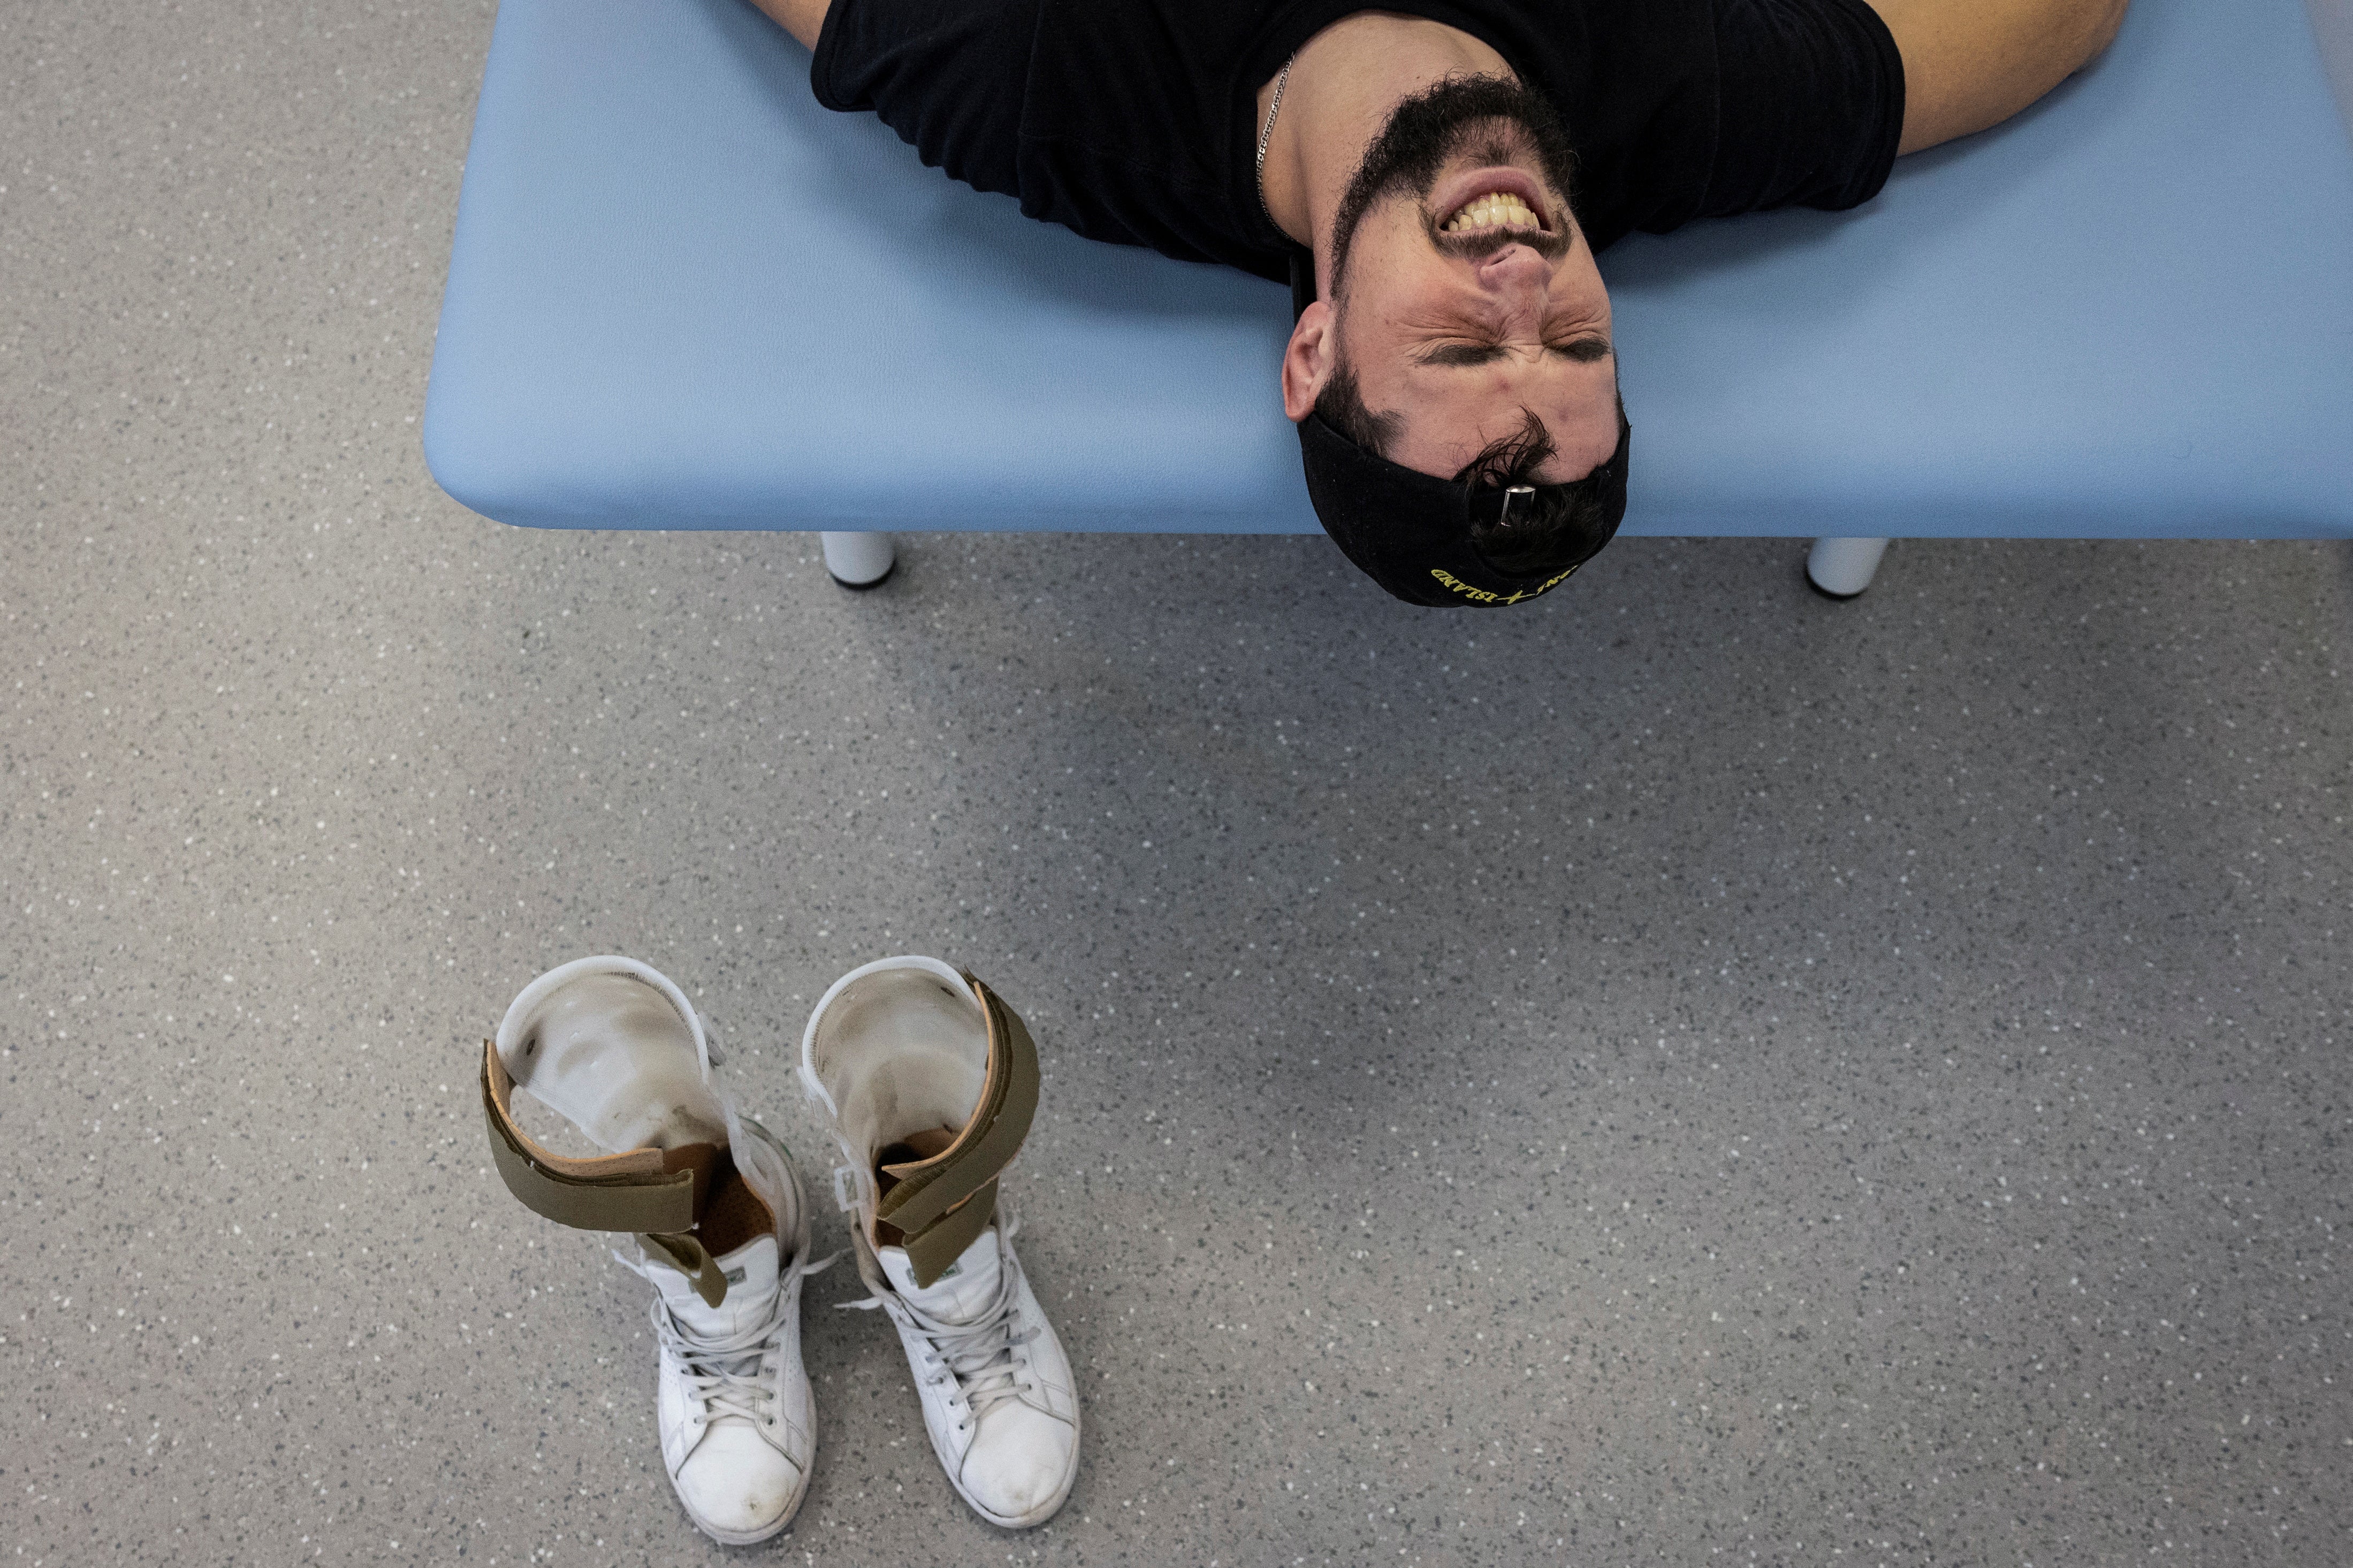 Rostyslav Prystupa, a Ukrainian marine who was injured in the spine while defending Mariupol, exercises at the Recovery Rehabilitation Center, amid Russia's attack on Ukraine, in Kyiv,